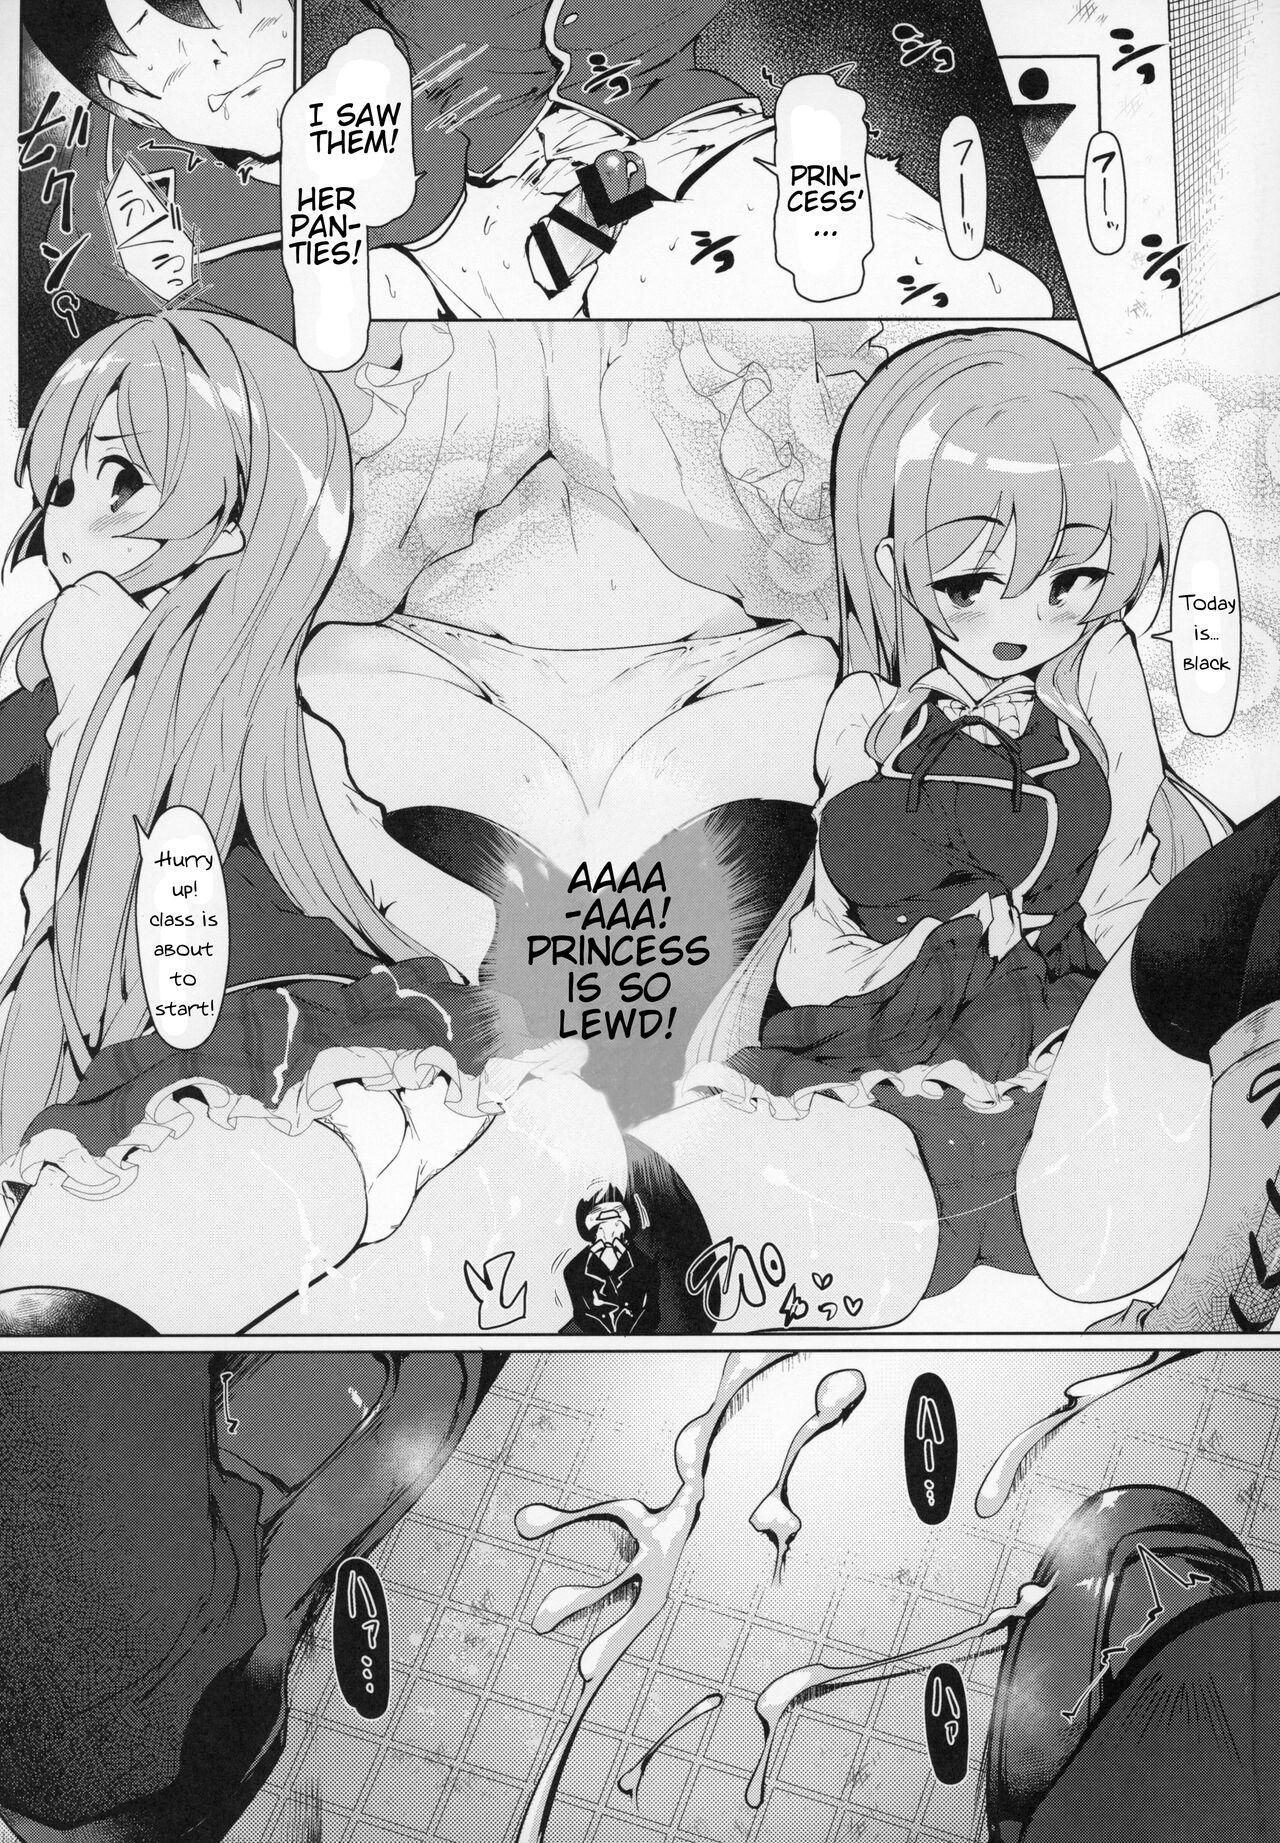 Women Sucking There's No Way An Ecchi Event Will Happen Between Me and the Princess of Manaria Kingdom! - Manaria friends Amature Porn - Page 6